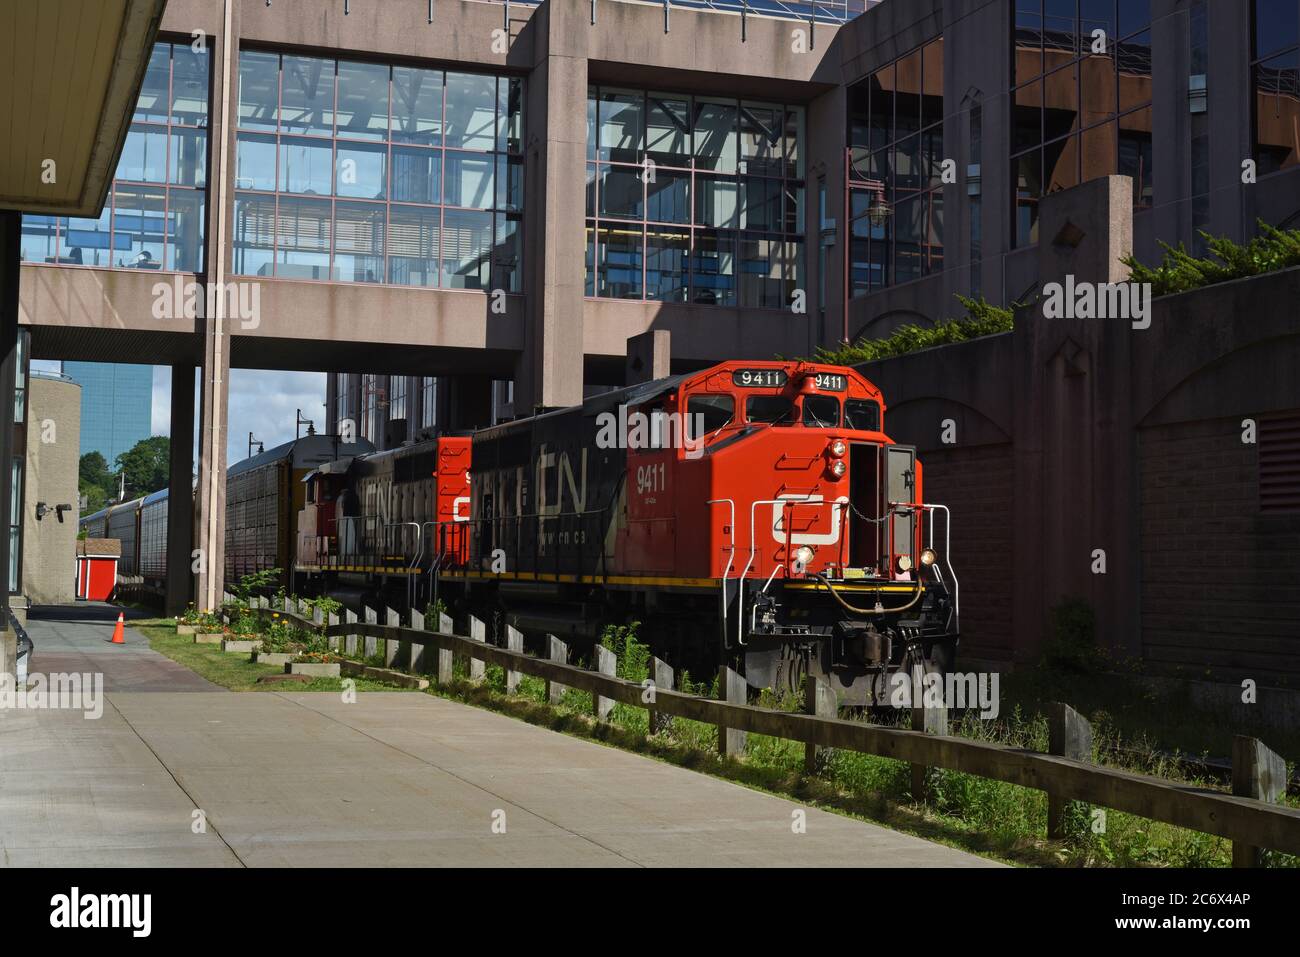 A Canadian National Railway (CNR) engines pull cars along tracks outside Alderney Gate in Dartmouth, Nova Scotia, Canada. Stock Photo